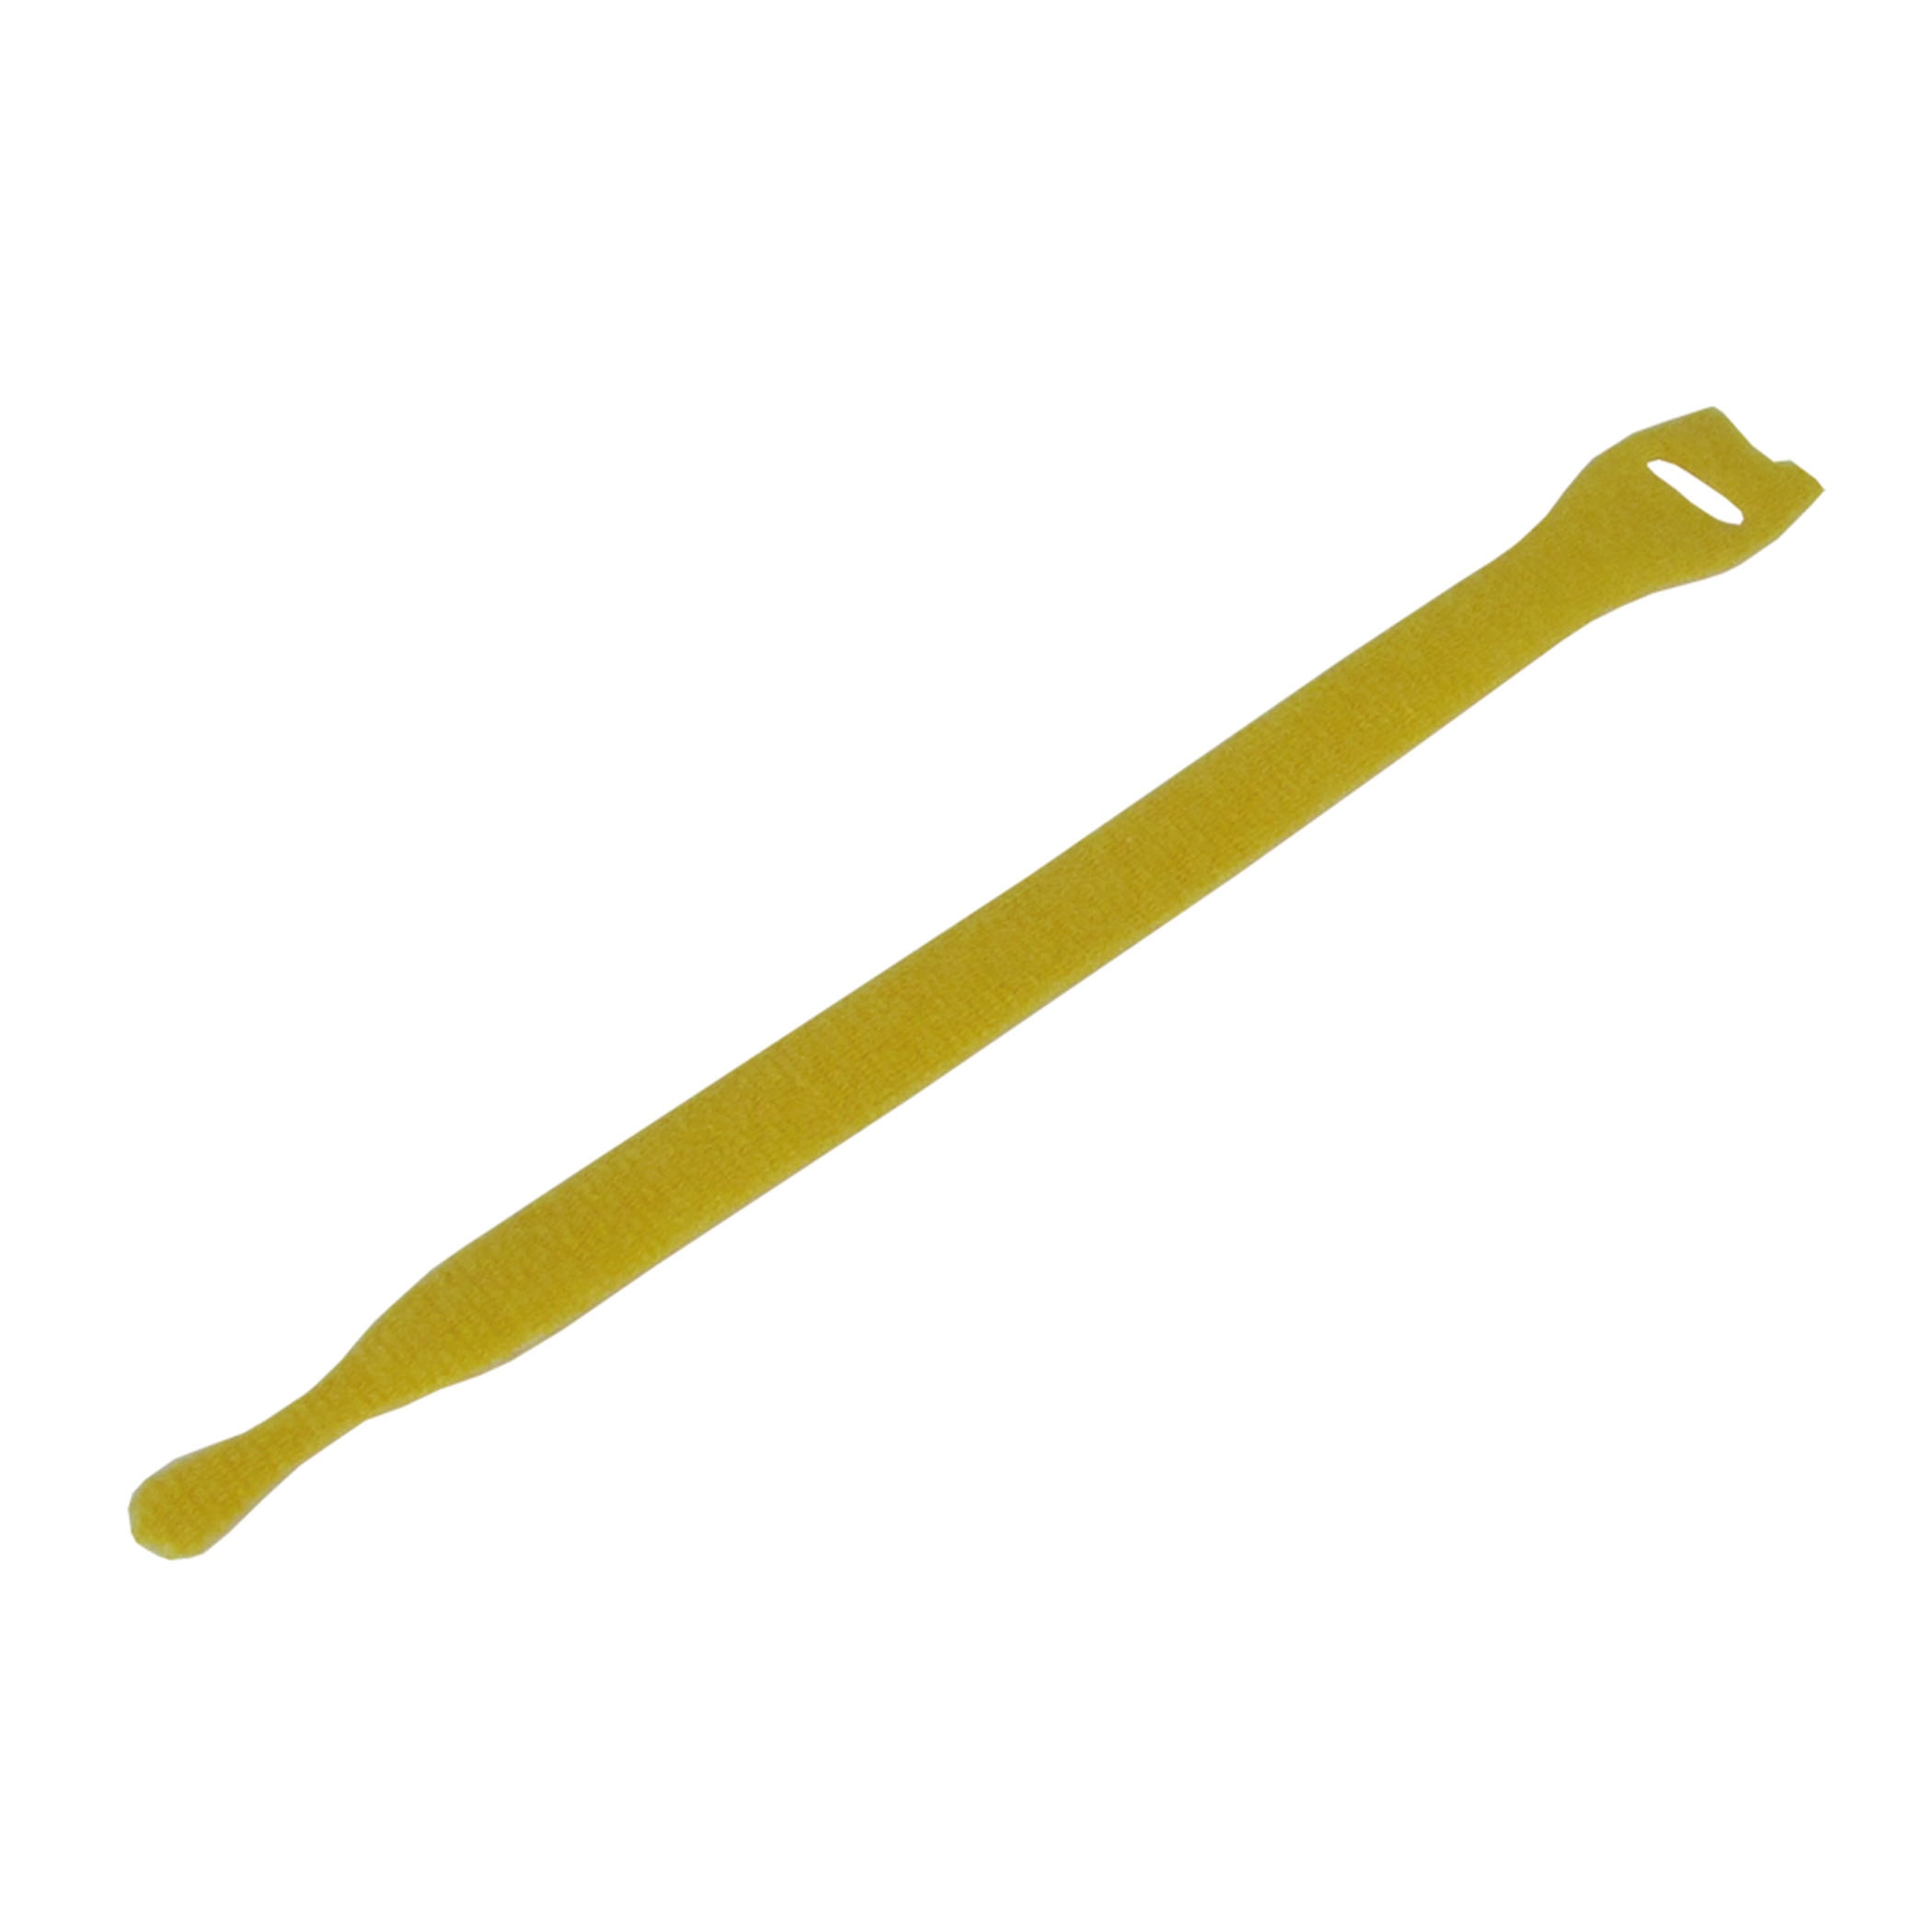 Cable Tie Yellow - t1513-200yh